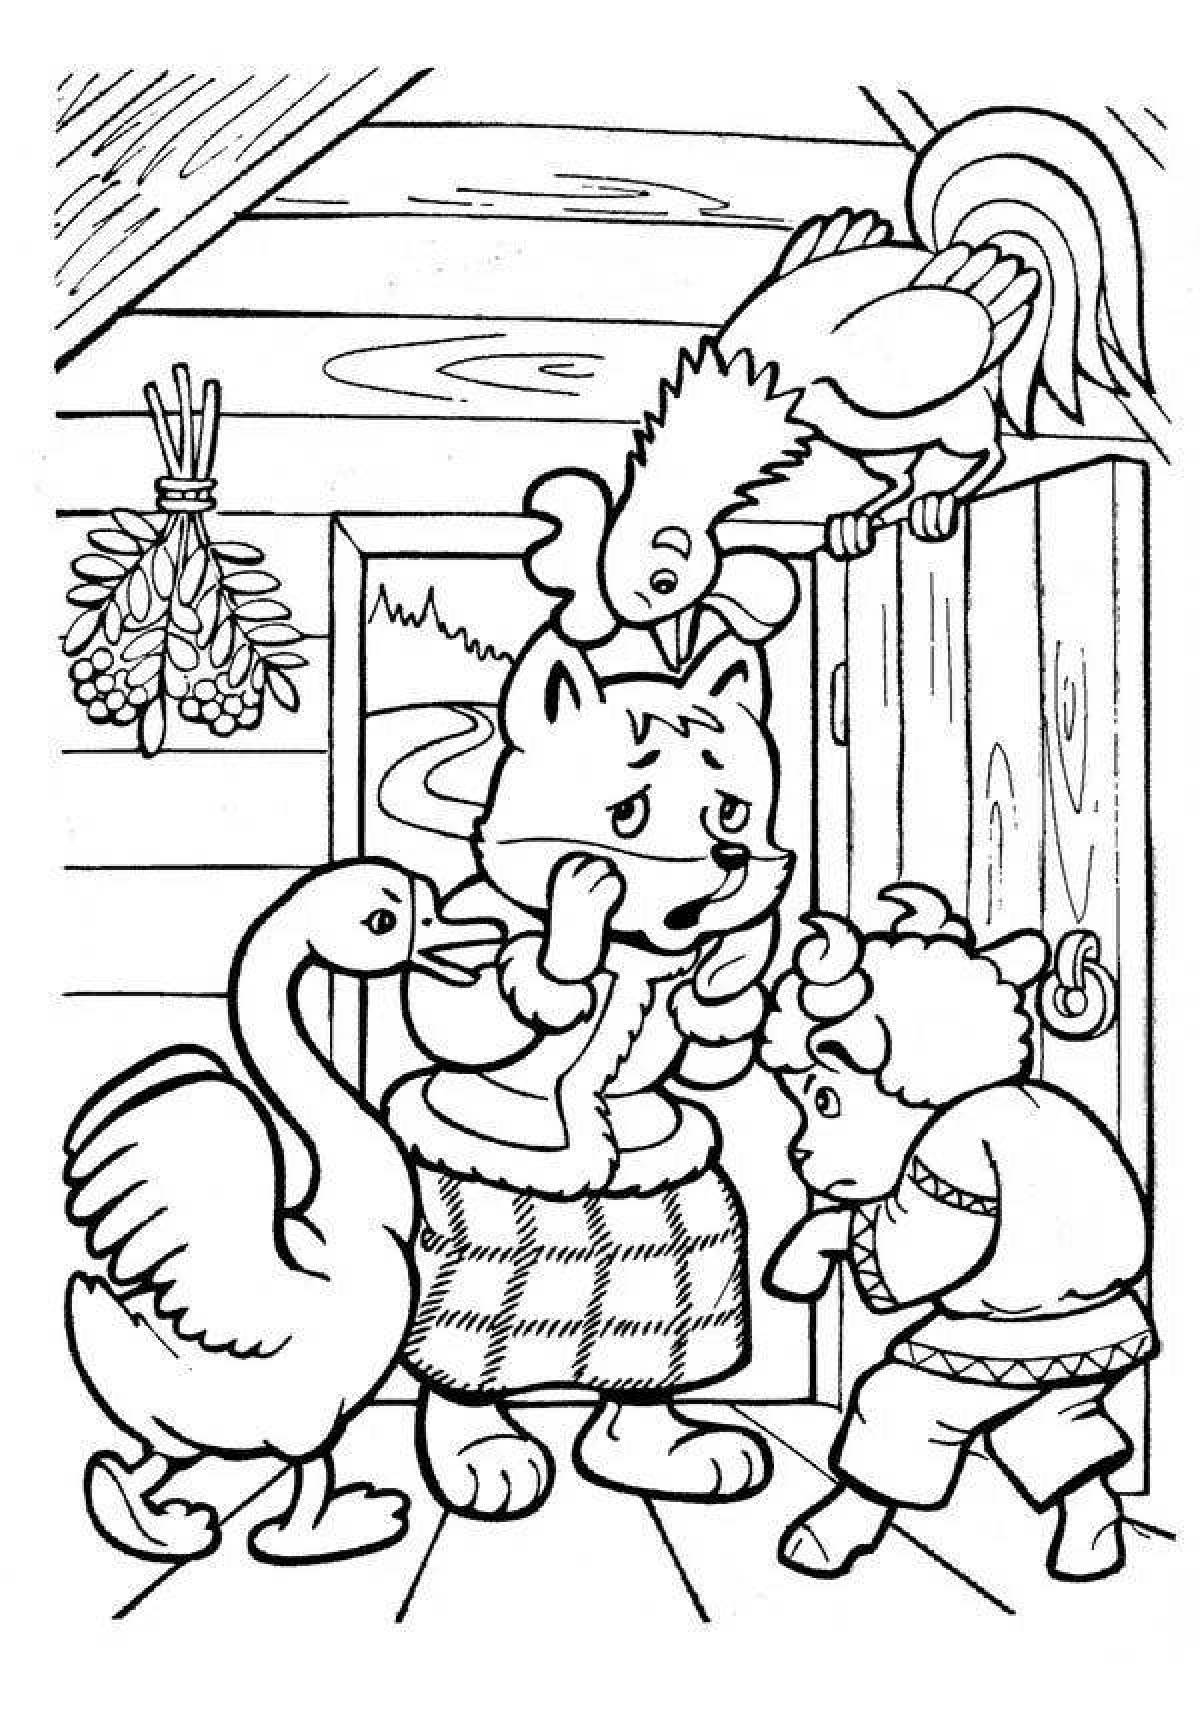 Colorful winter hut coloring page for kids